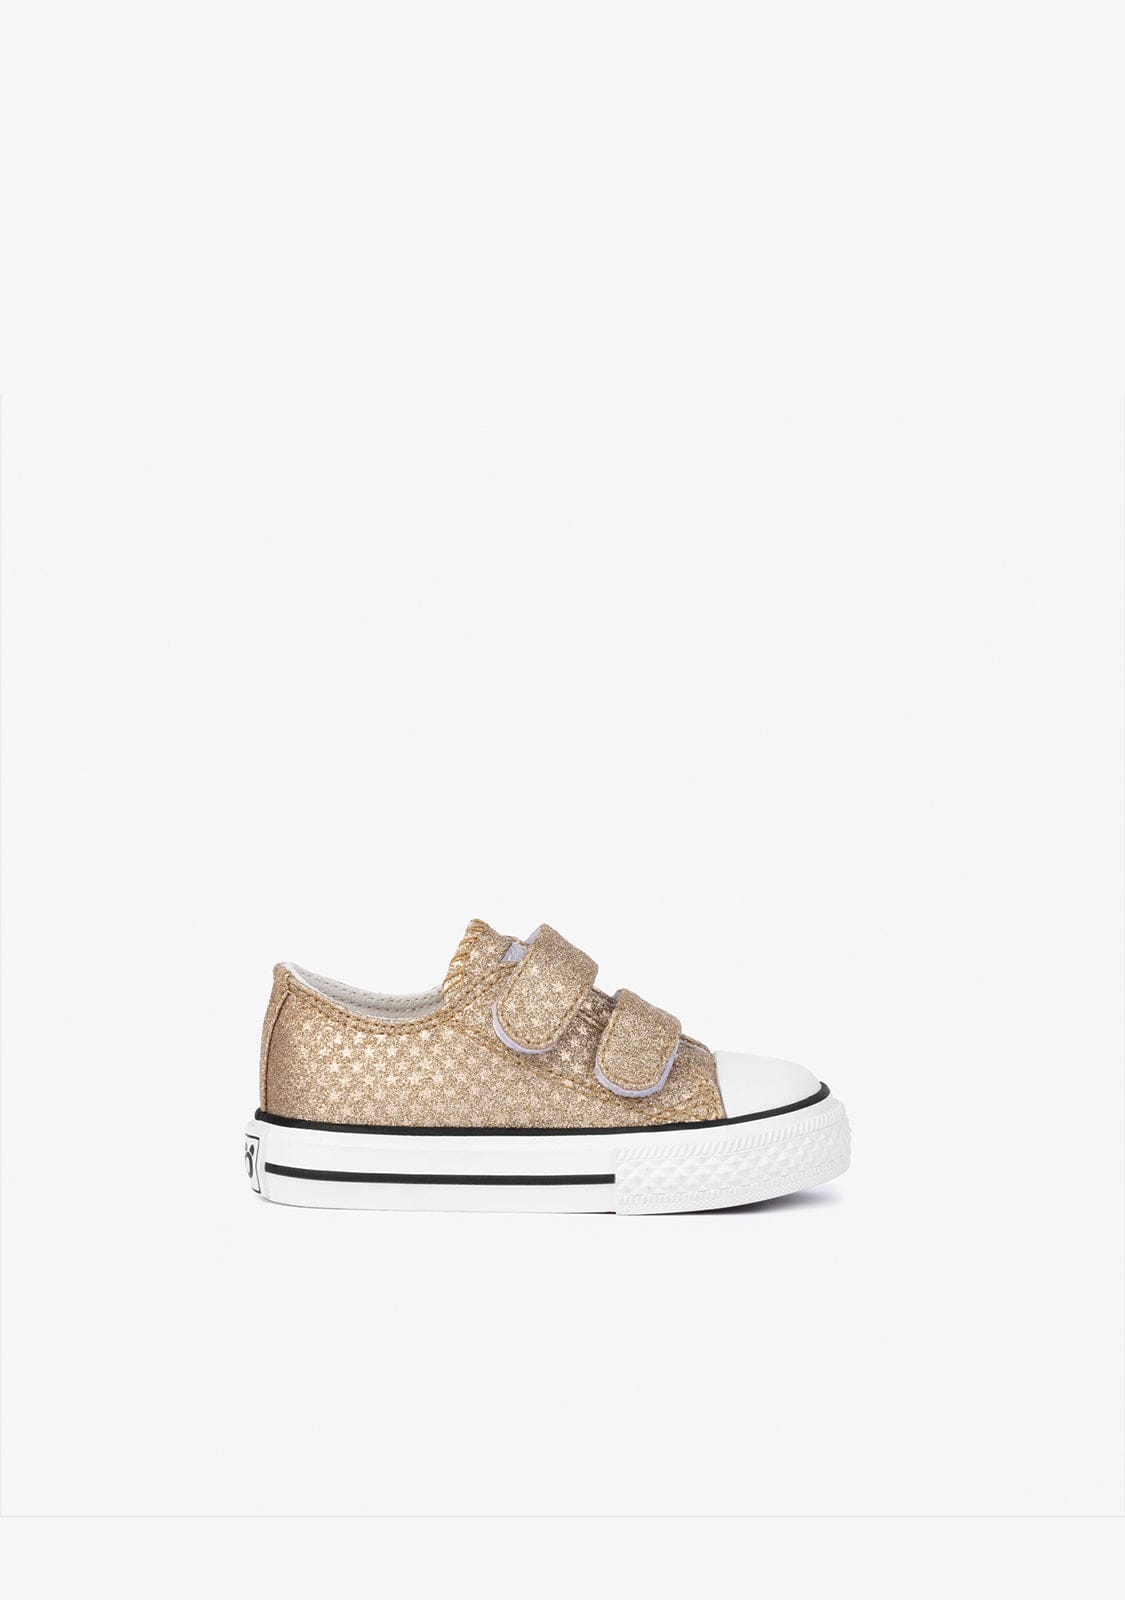 OSITO Shoes Baby's Platium Glitter Sneakers